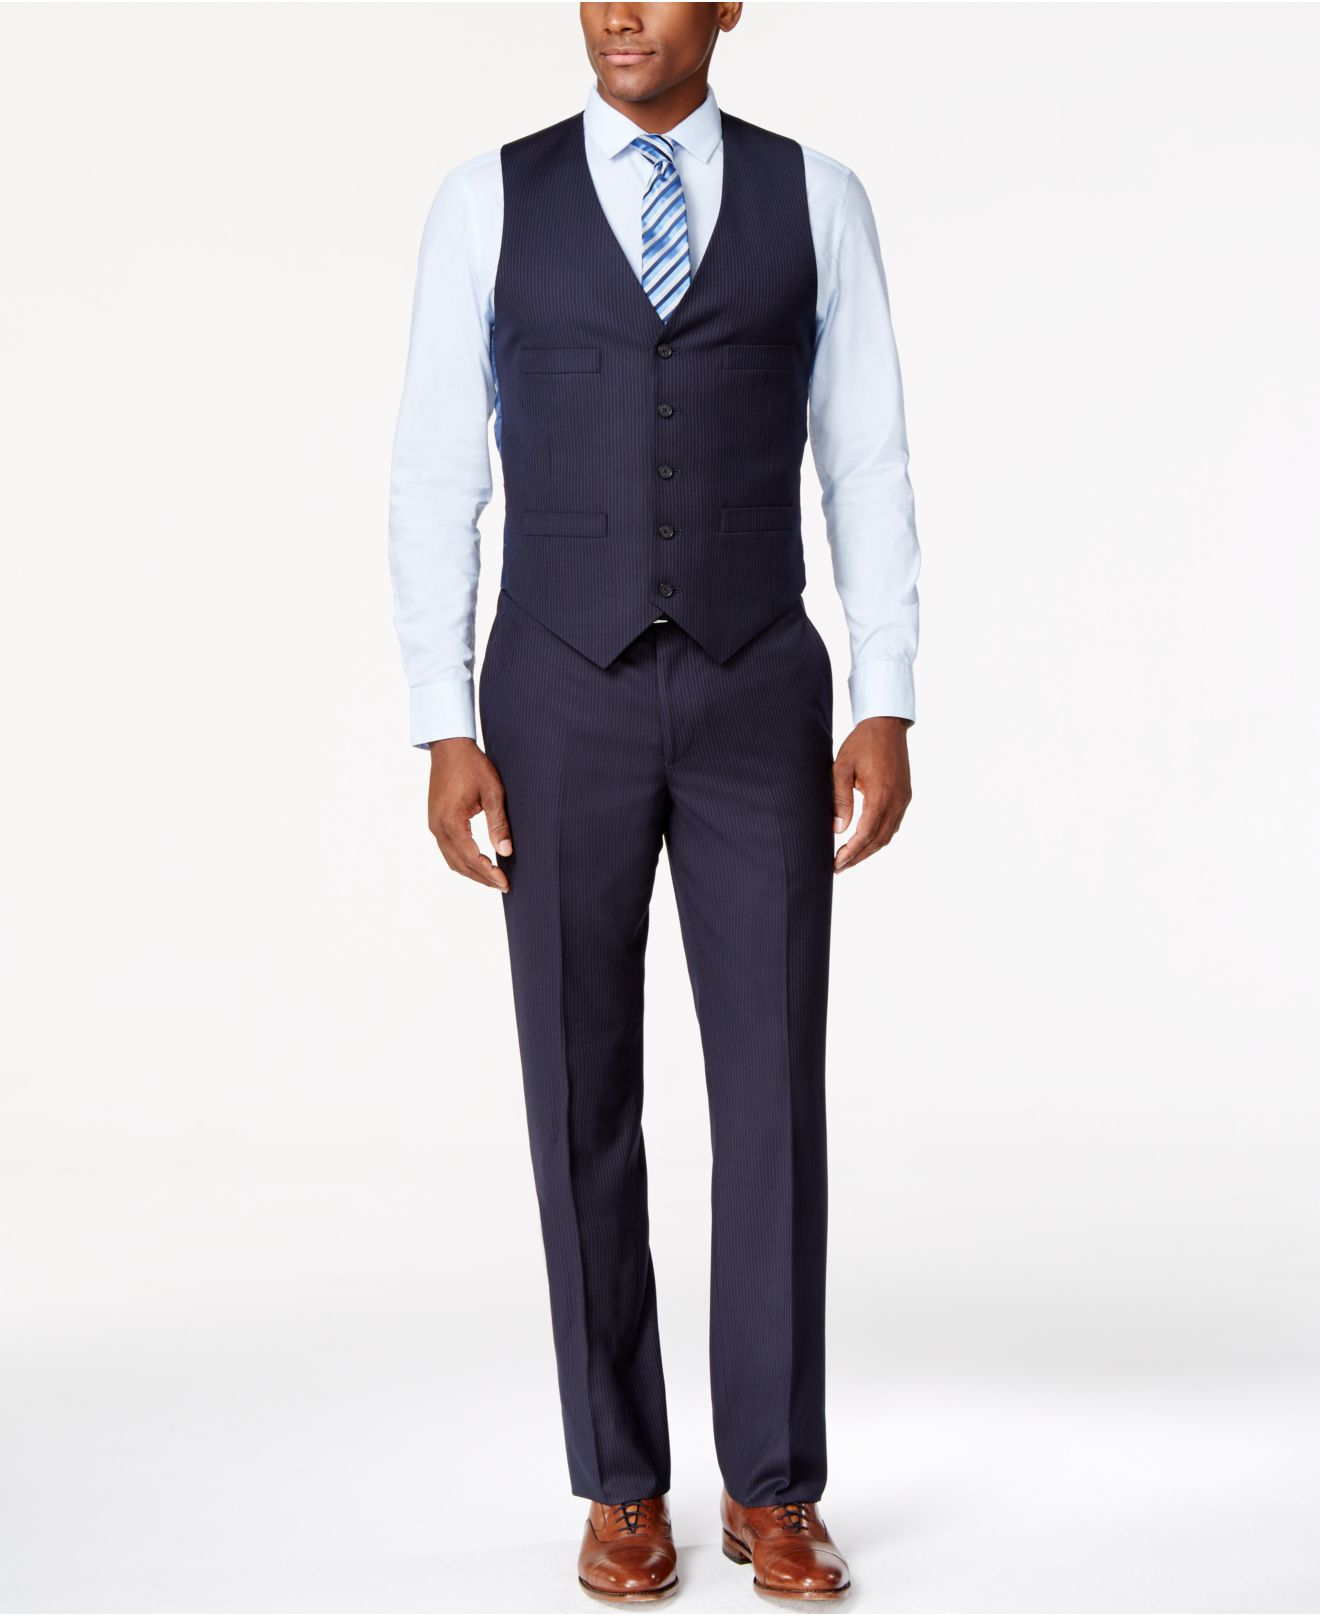 Kenneth Cole Reaction Synthetic Navy Vested Pinstripe Slim-fit Suit in Blue  for Men - Lyst